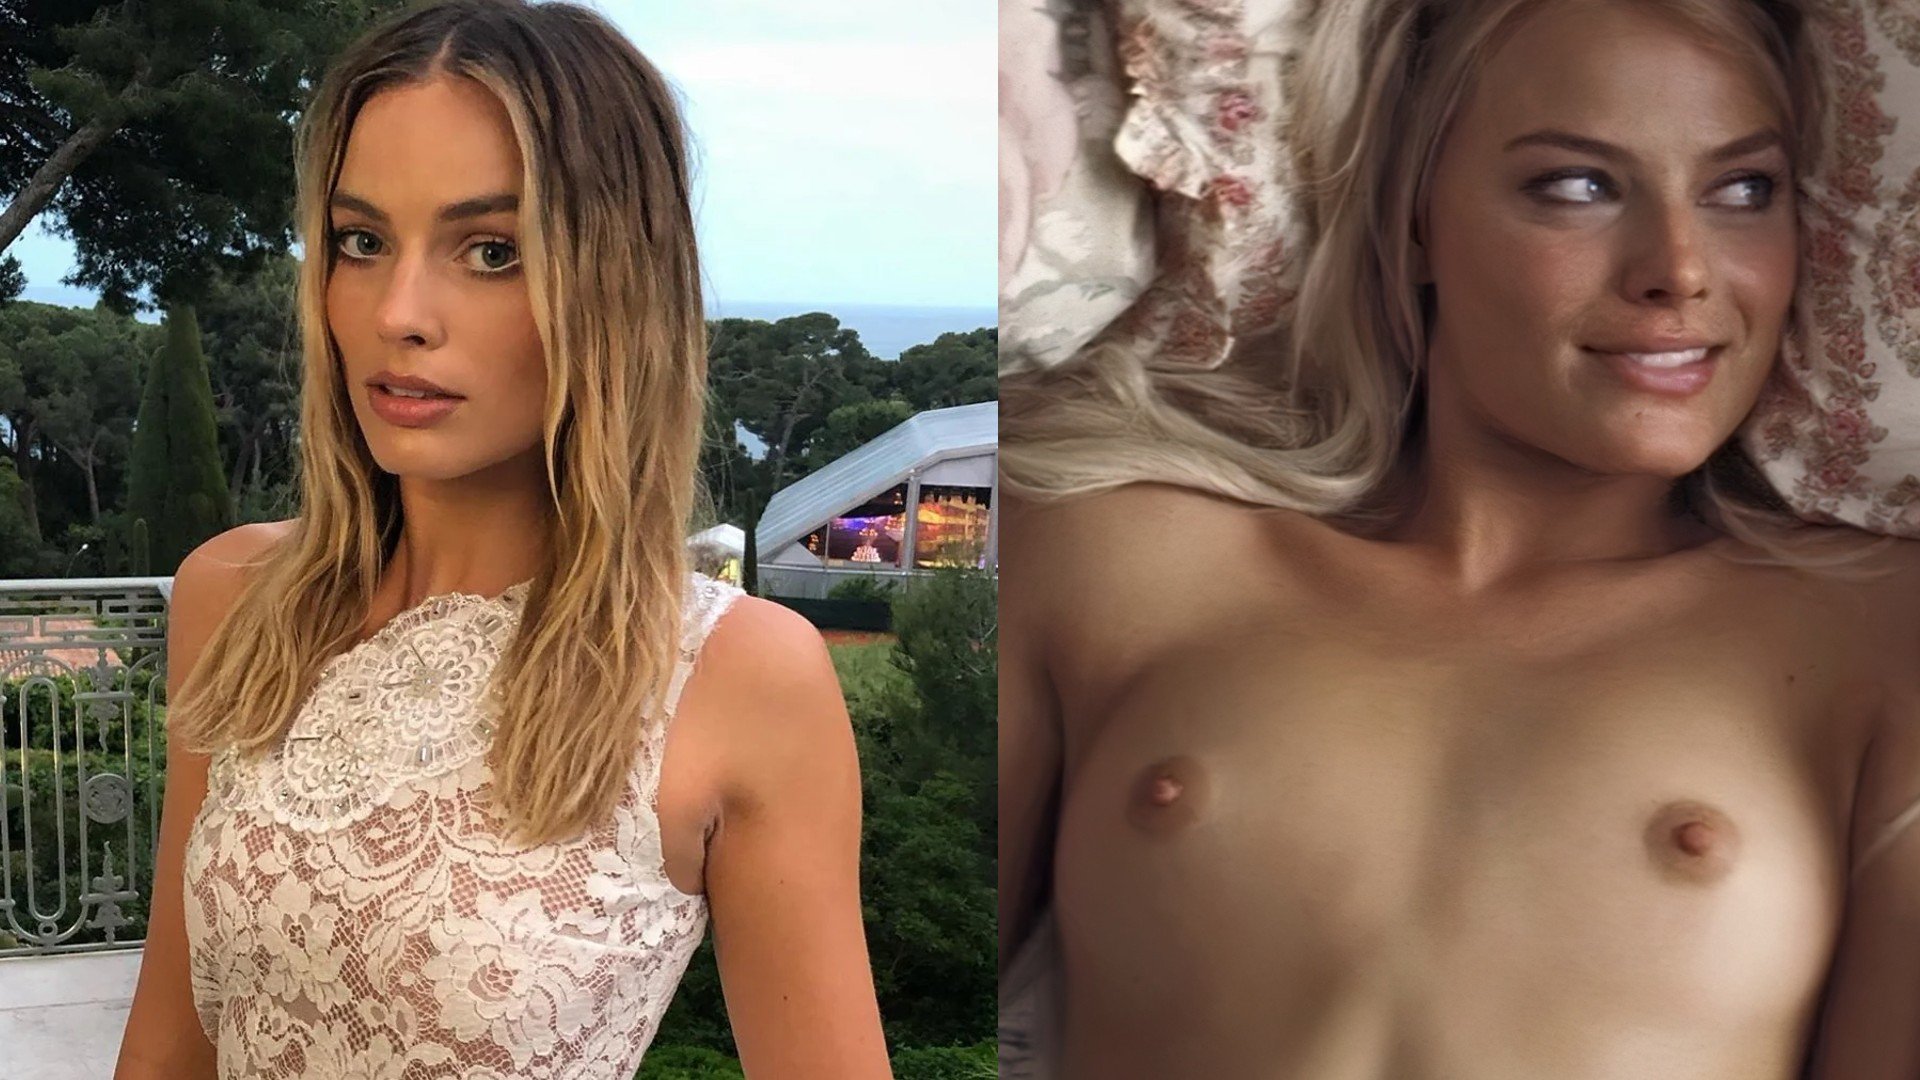 art baluyot recommends pictures of margot robbie nude pic